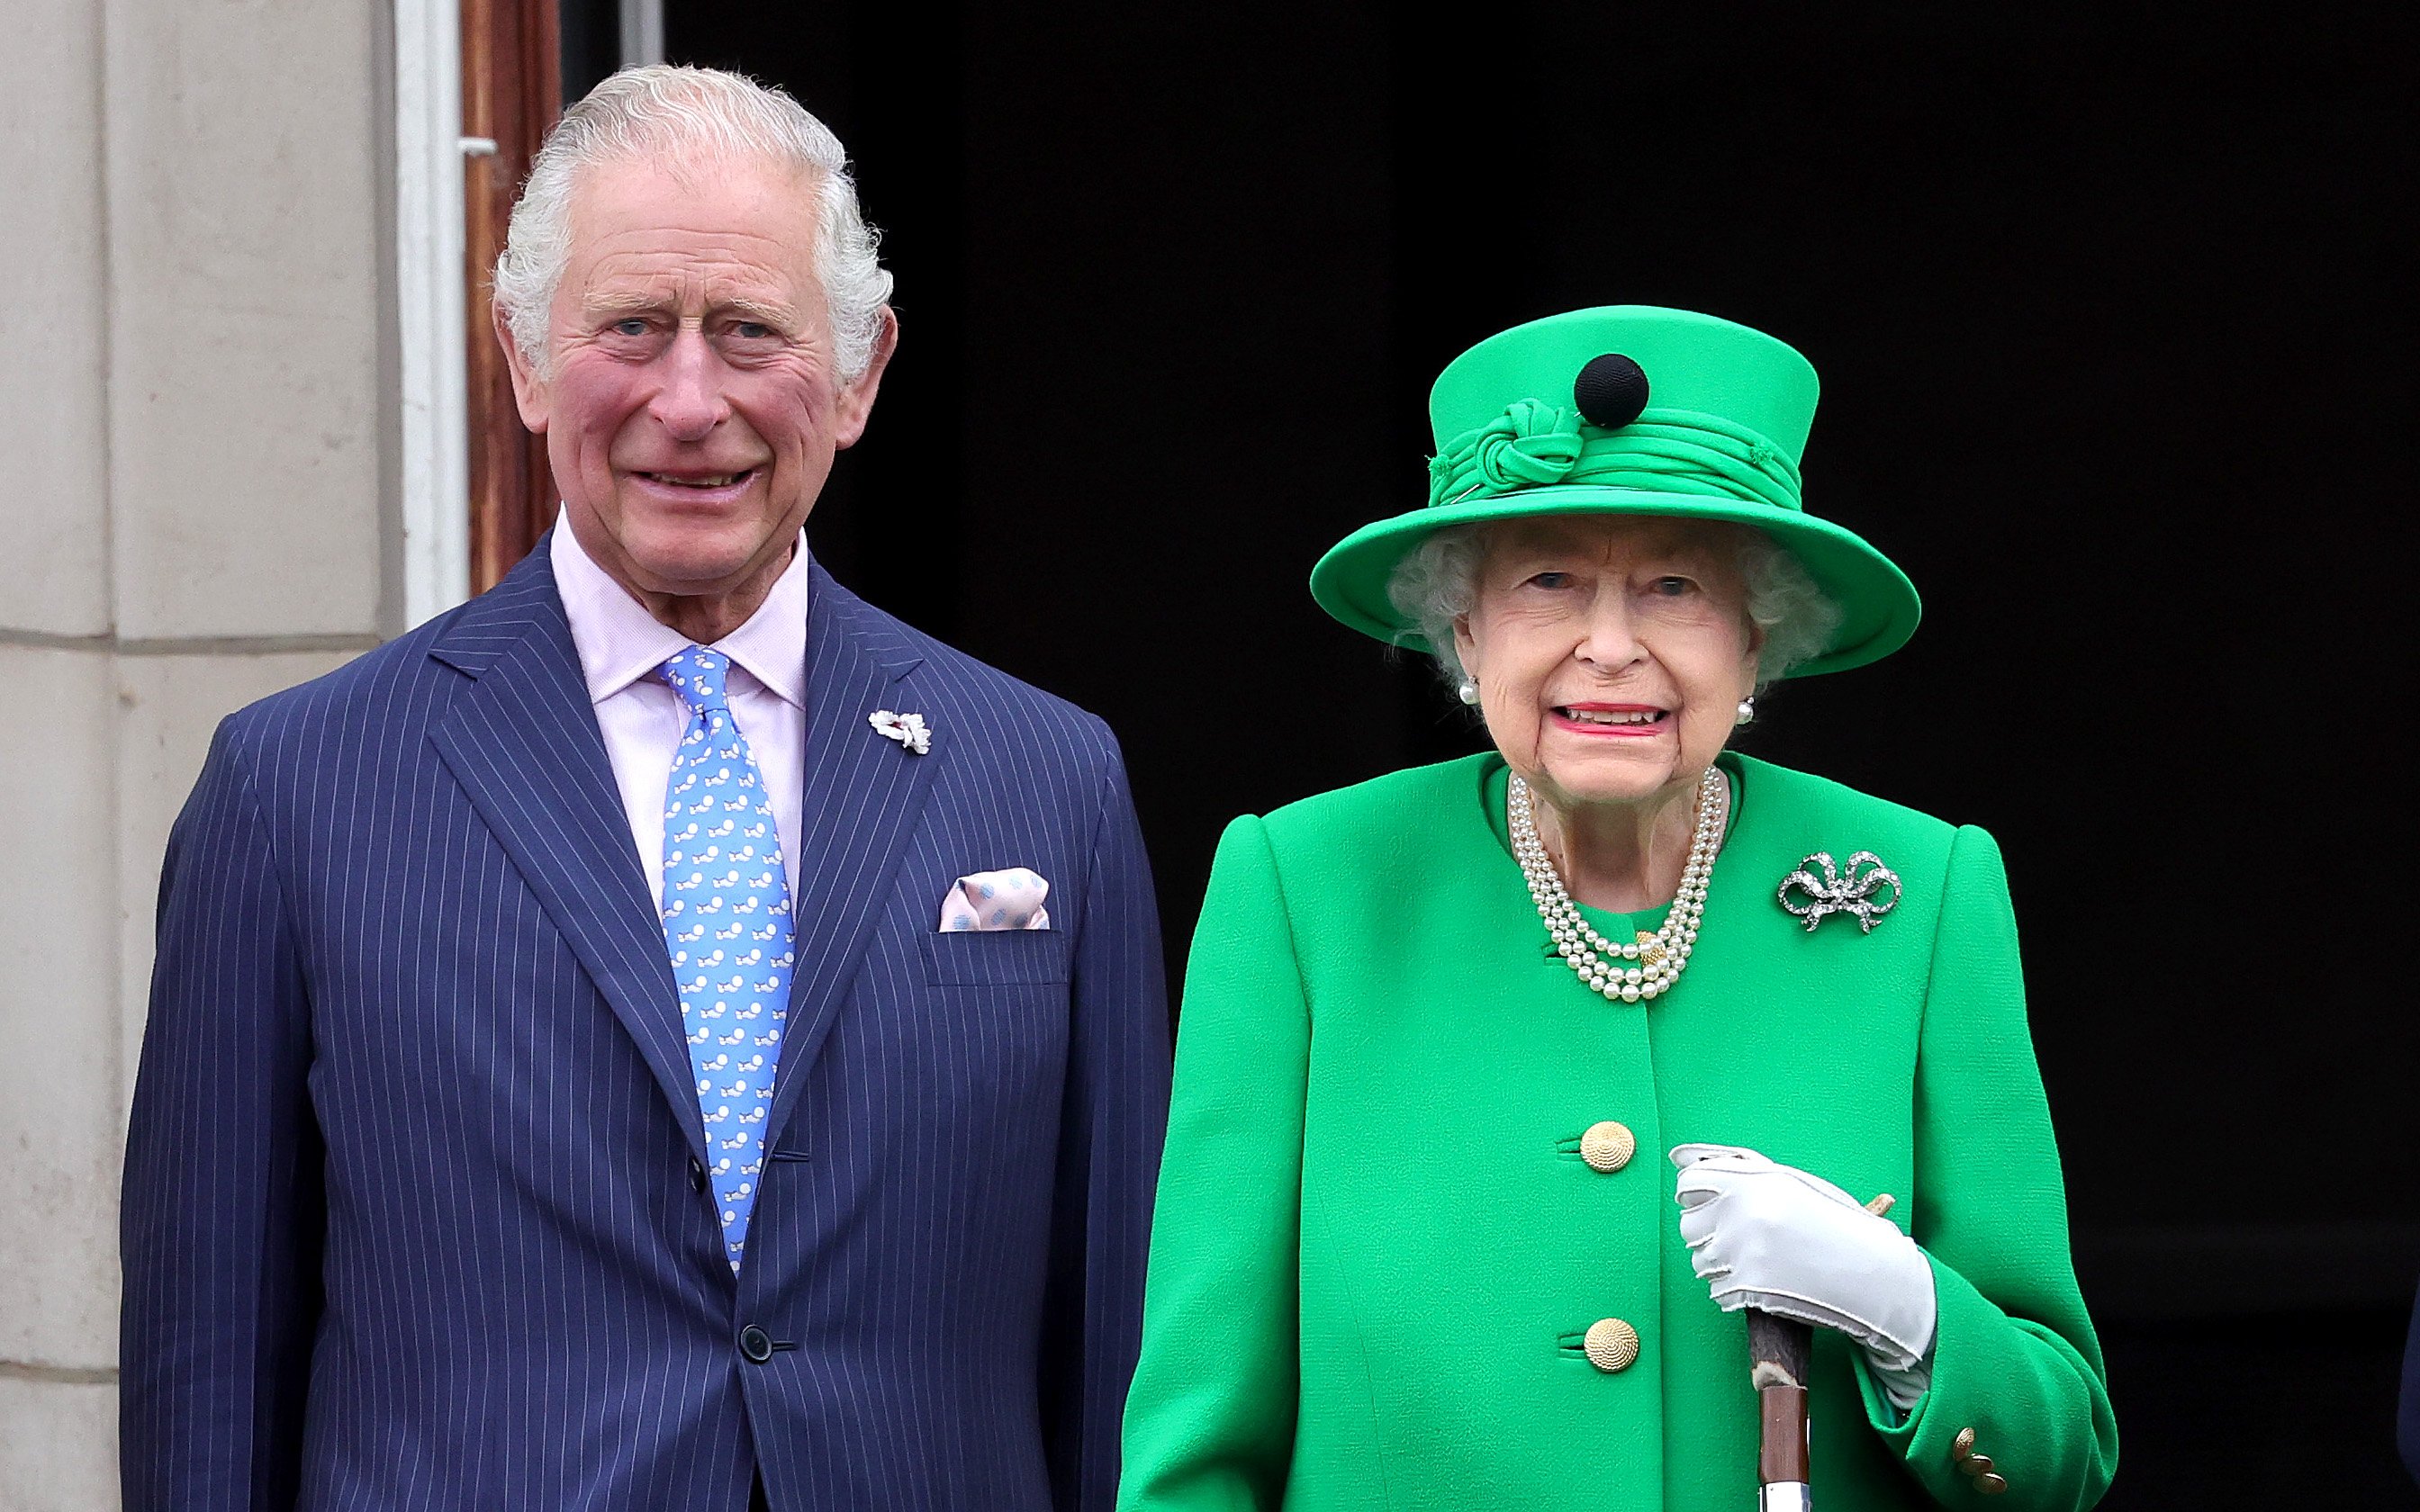 Queen Elizabeth II and Prince Charles, Prince of Wales on the balcony of Buckingham Palace on June 5, 2022 | Source: Getty Images